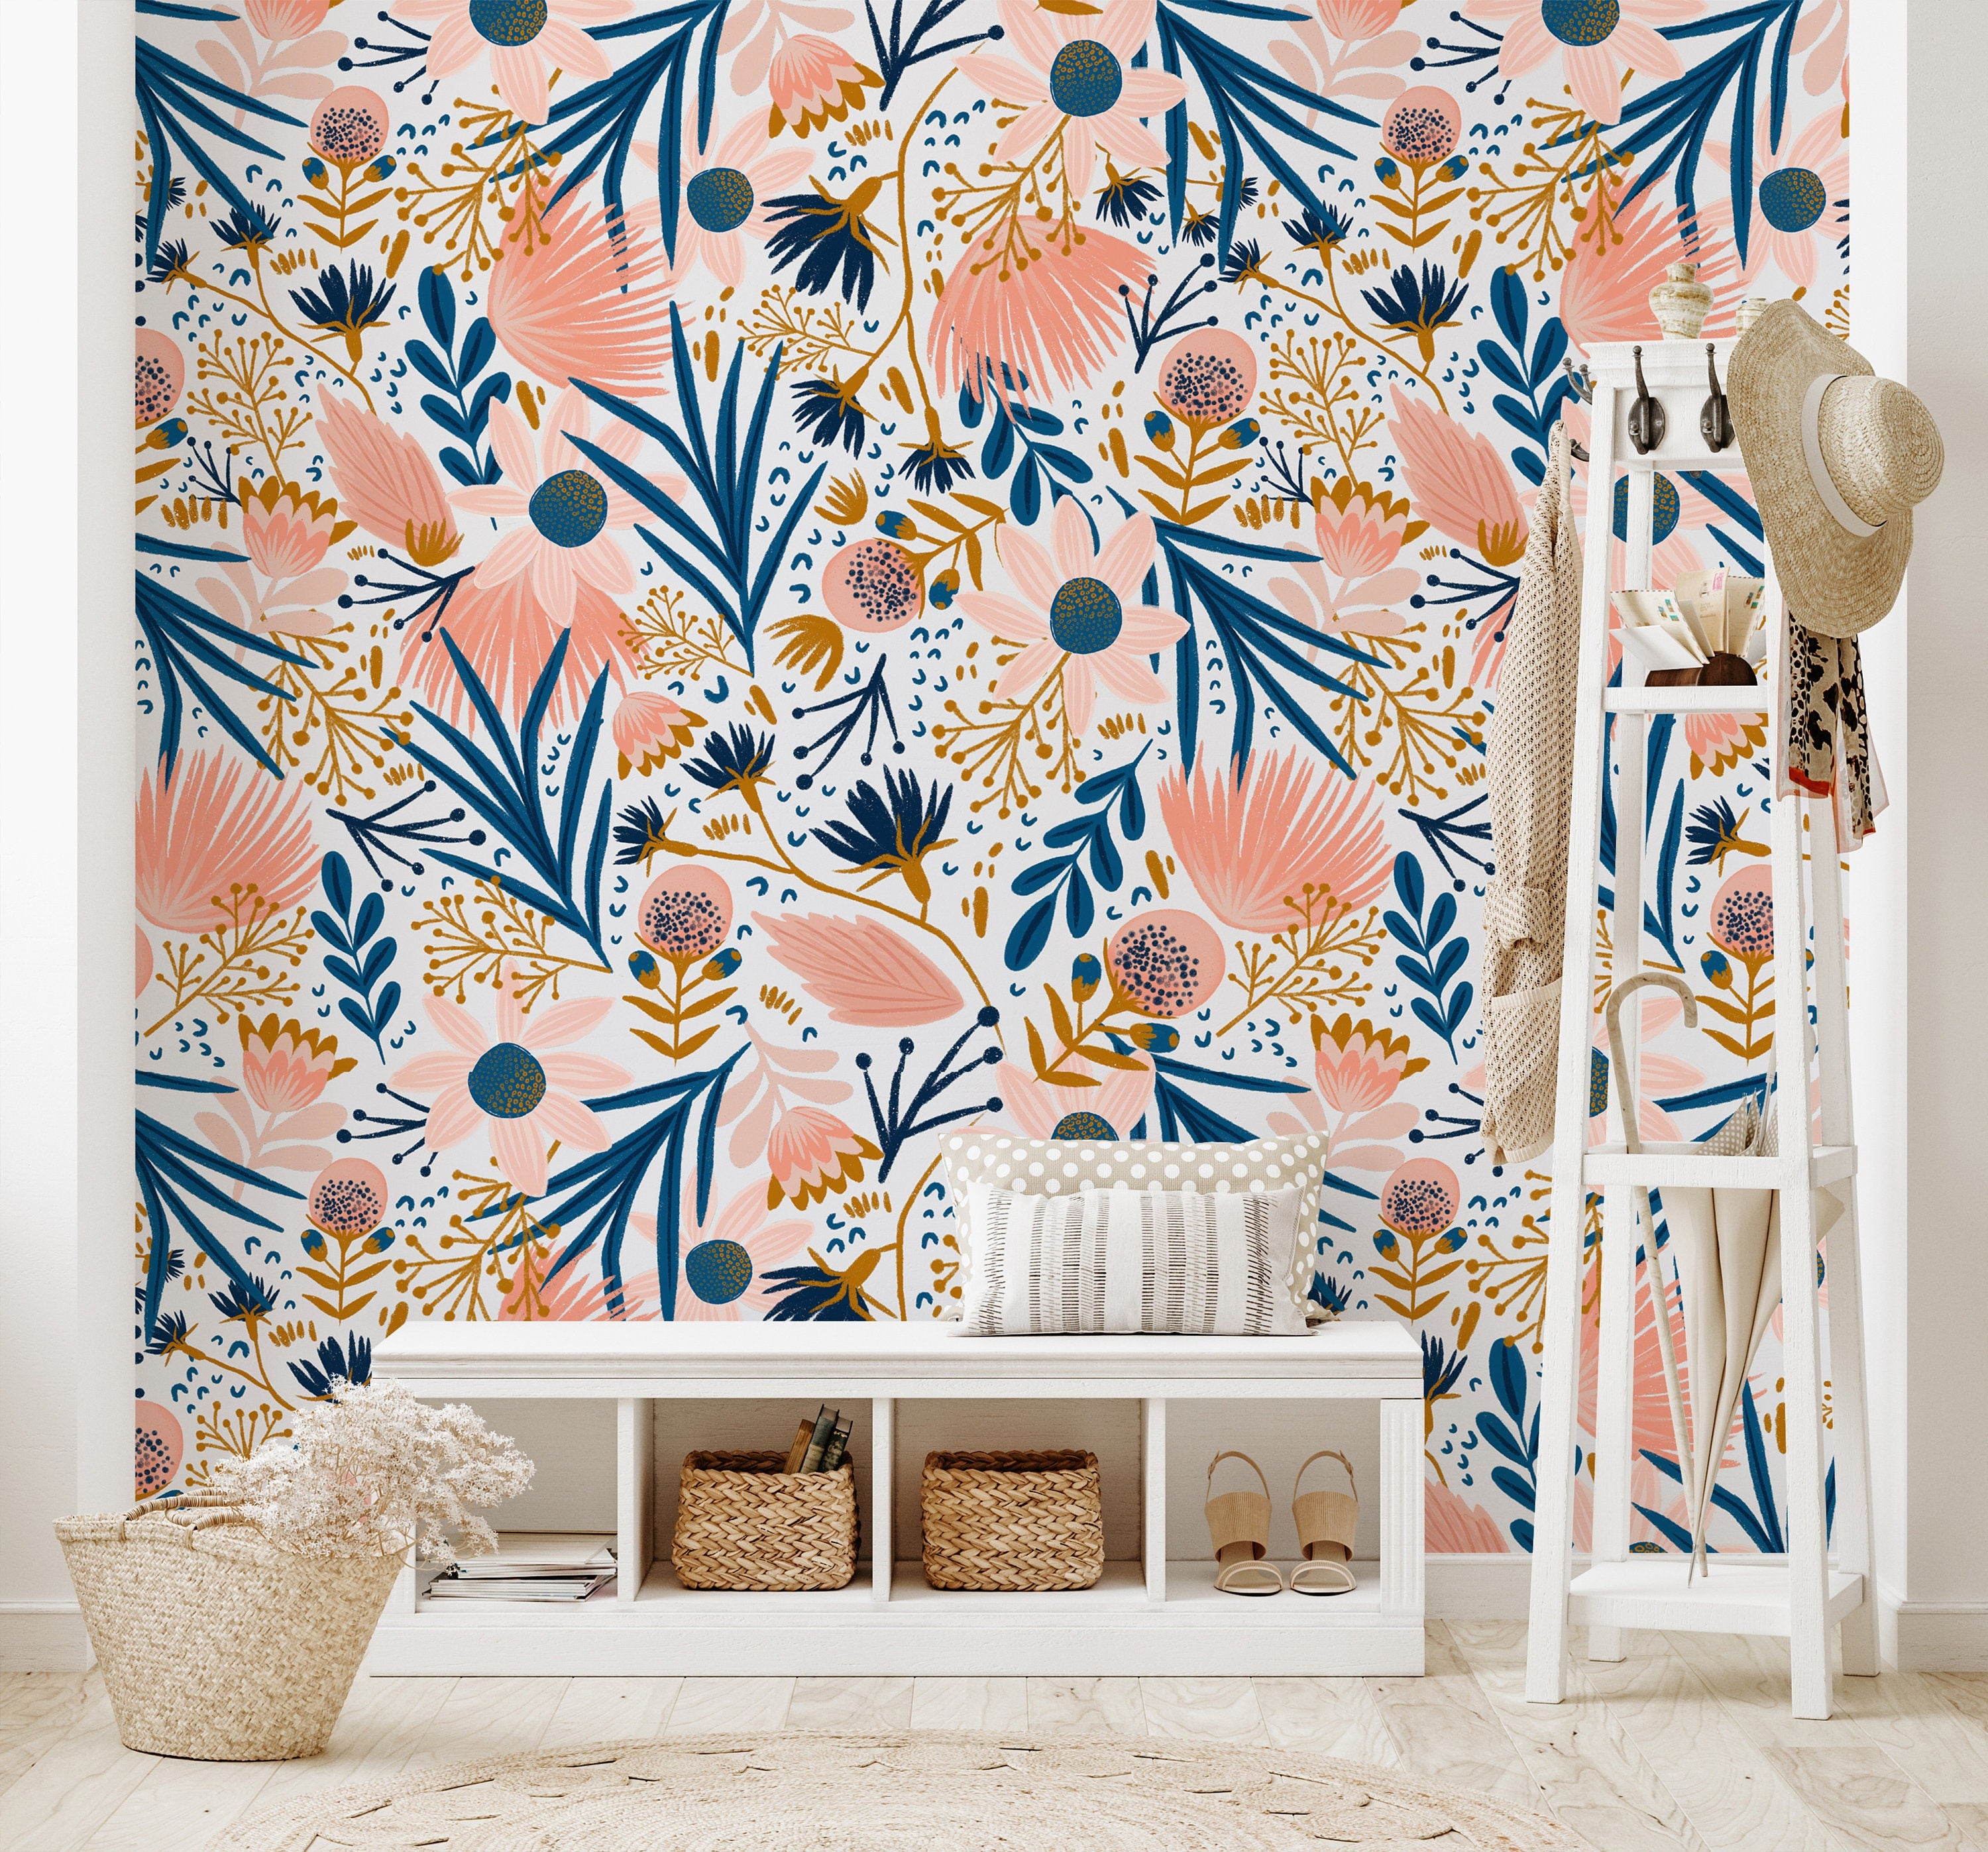 Pink And Navy Floral Wallpaper | Removable Wallpaper | Peel And Stick Wallpaper | Adhesive Wallpaper | Wall Paper Peel Stick Wall Mural 3620 - JamesAndColors